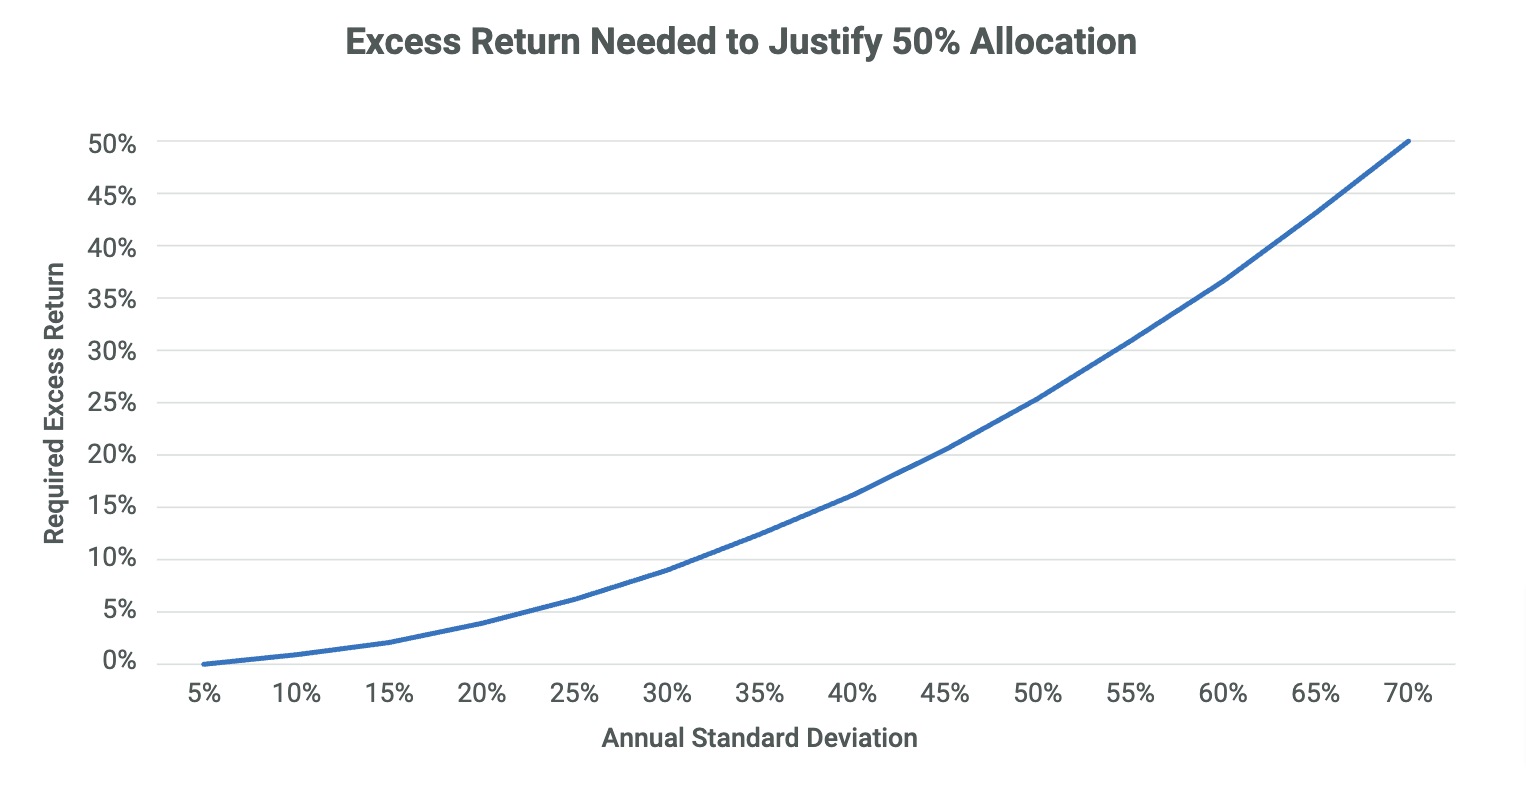 Excess Return Needed to Justify 50% Allocation